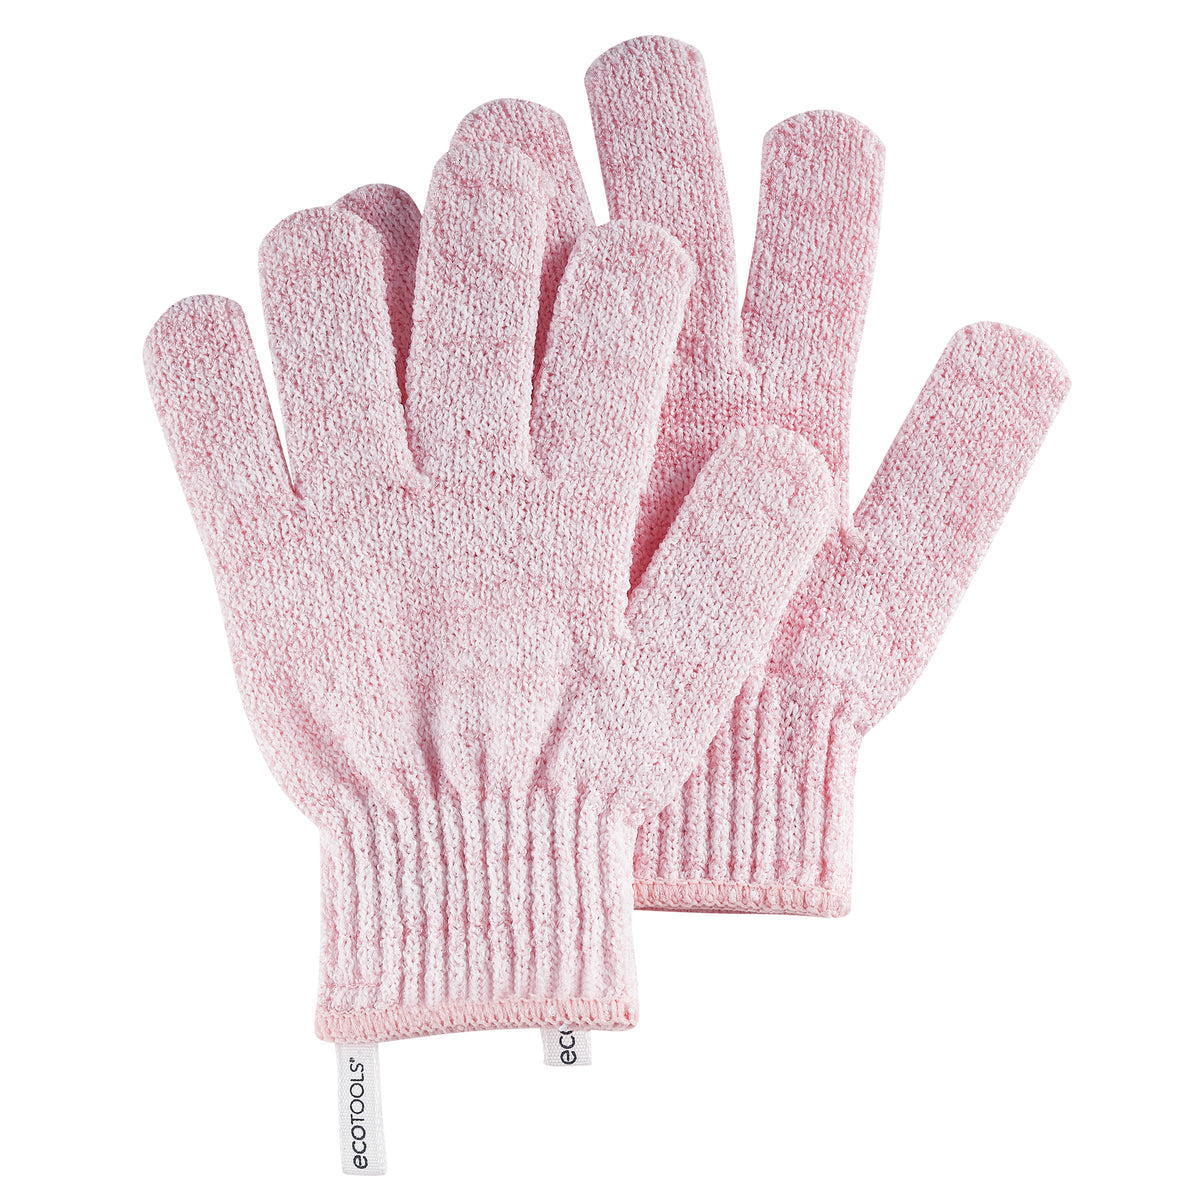 Exfoliating Bath & Shower Gloves, Pink – EcoTools Beauty